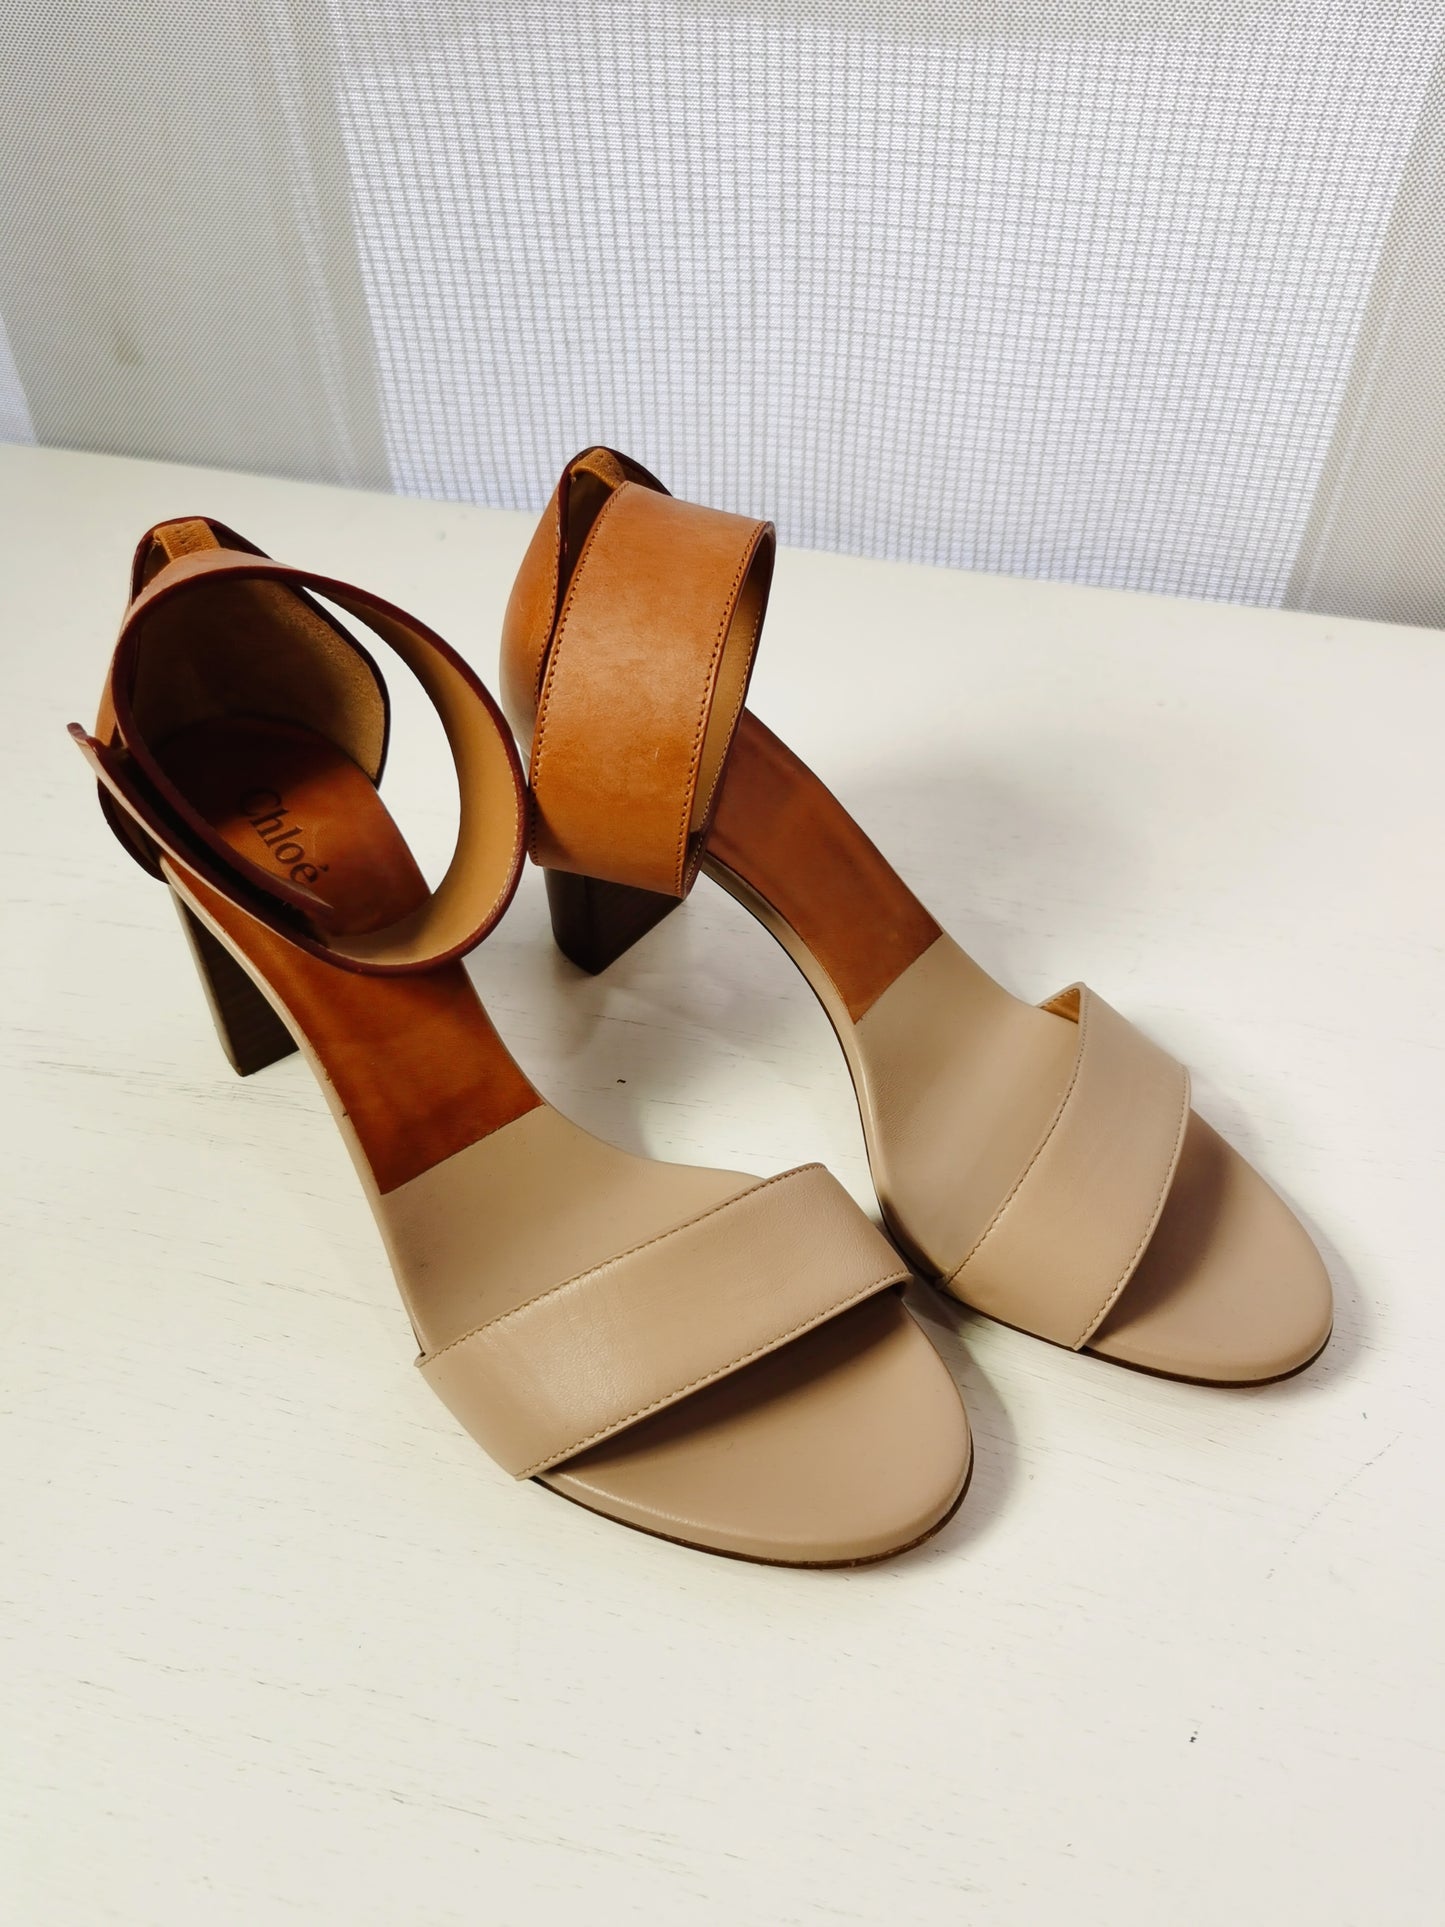 Chloe Leather Colorblock Pattern Sandals Size37